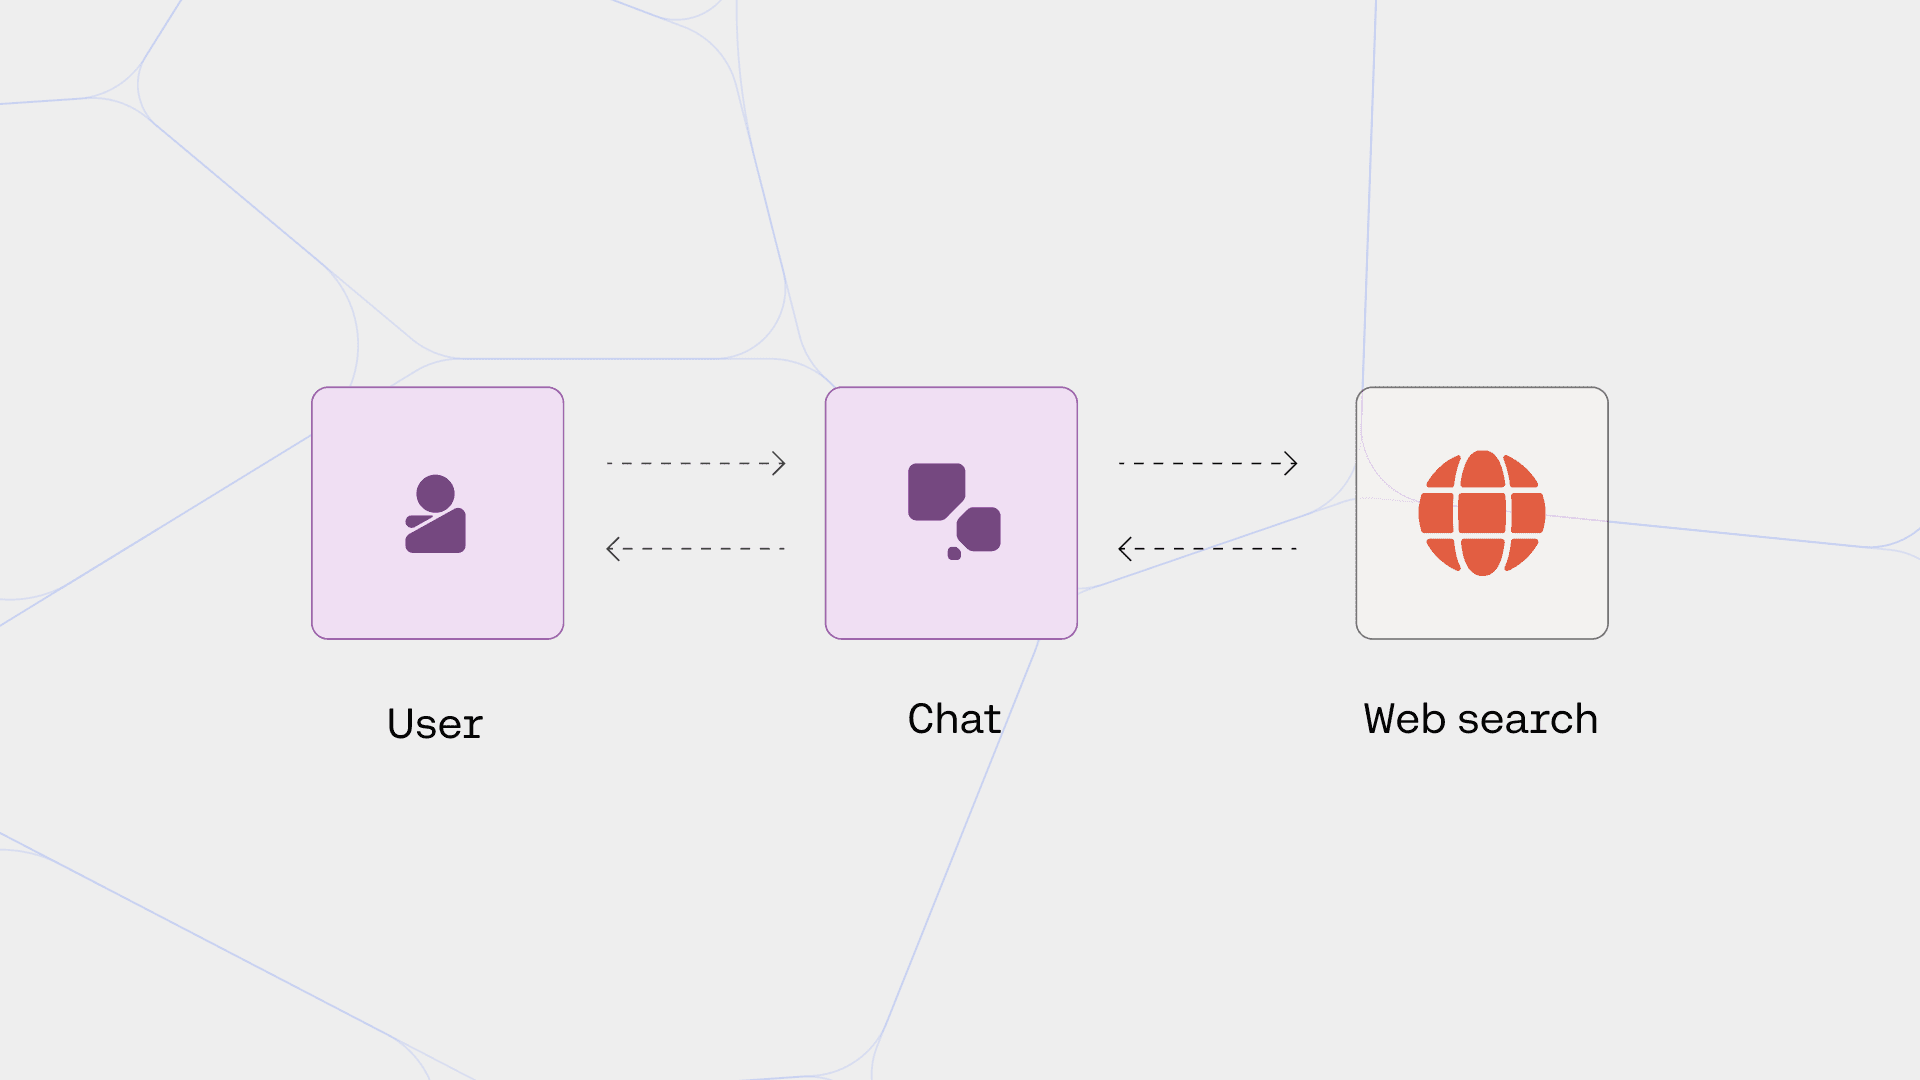 How to Build RAG Applications With Connectors